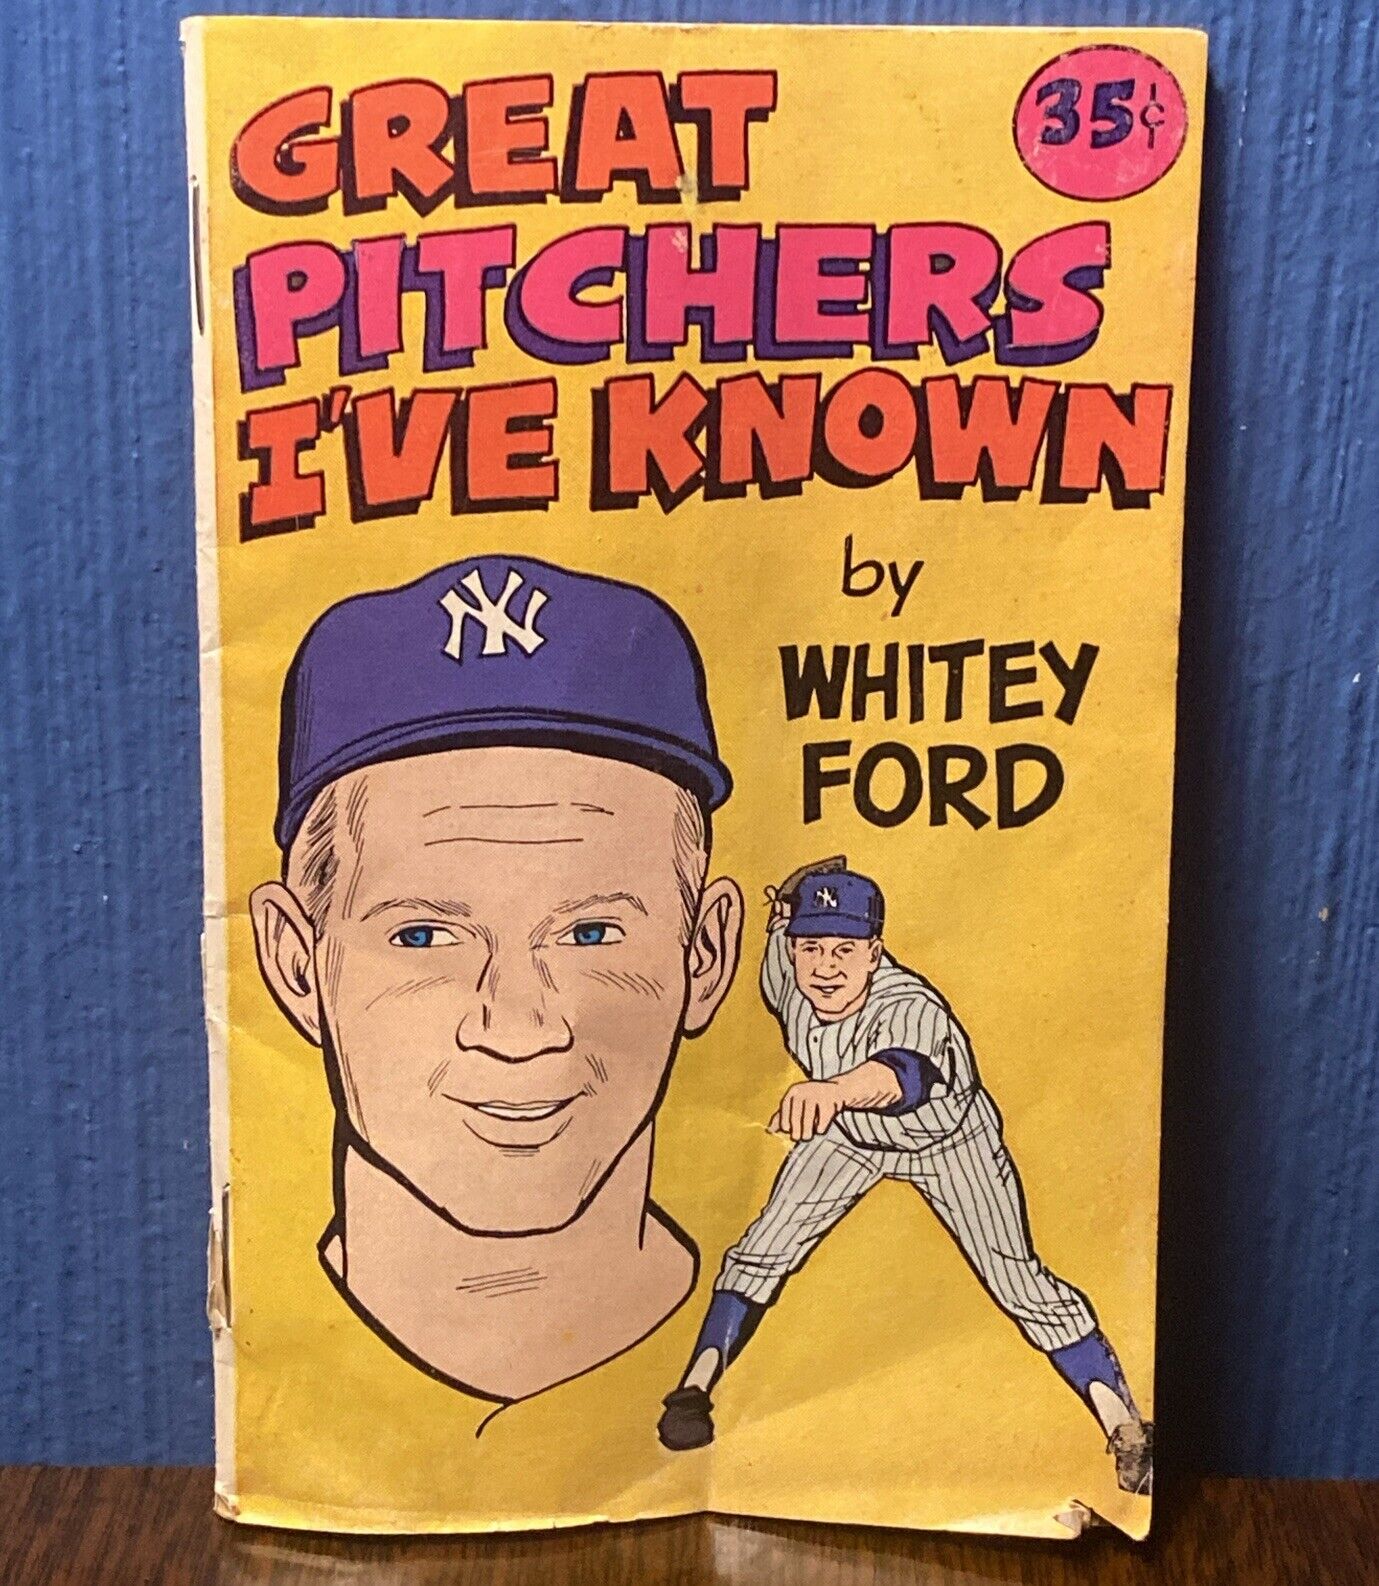 1976 Carvel Great Pitchers I've Known Comic Book By Whitey Ford VINTAGE MLB 70s